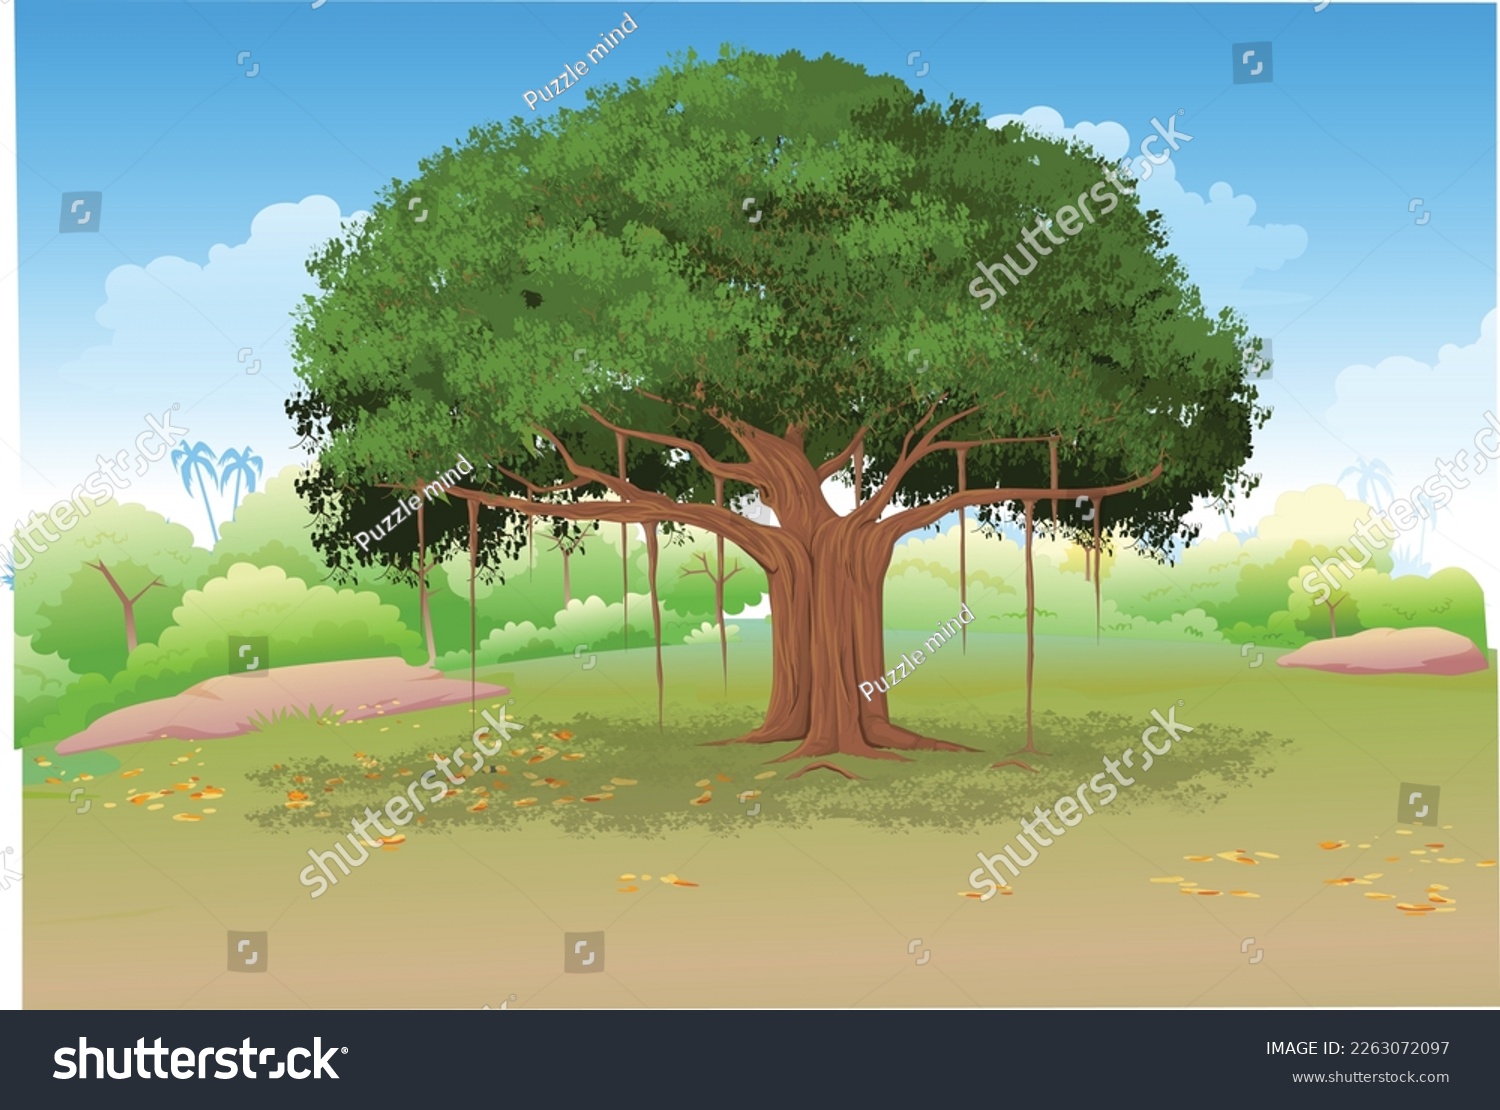 SVG of Banyan tree with multiple branches and leaf's(leaves)dence,havey,bulky svg